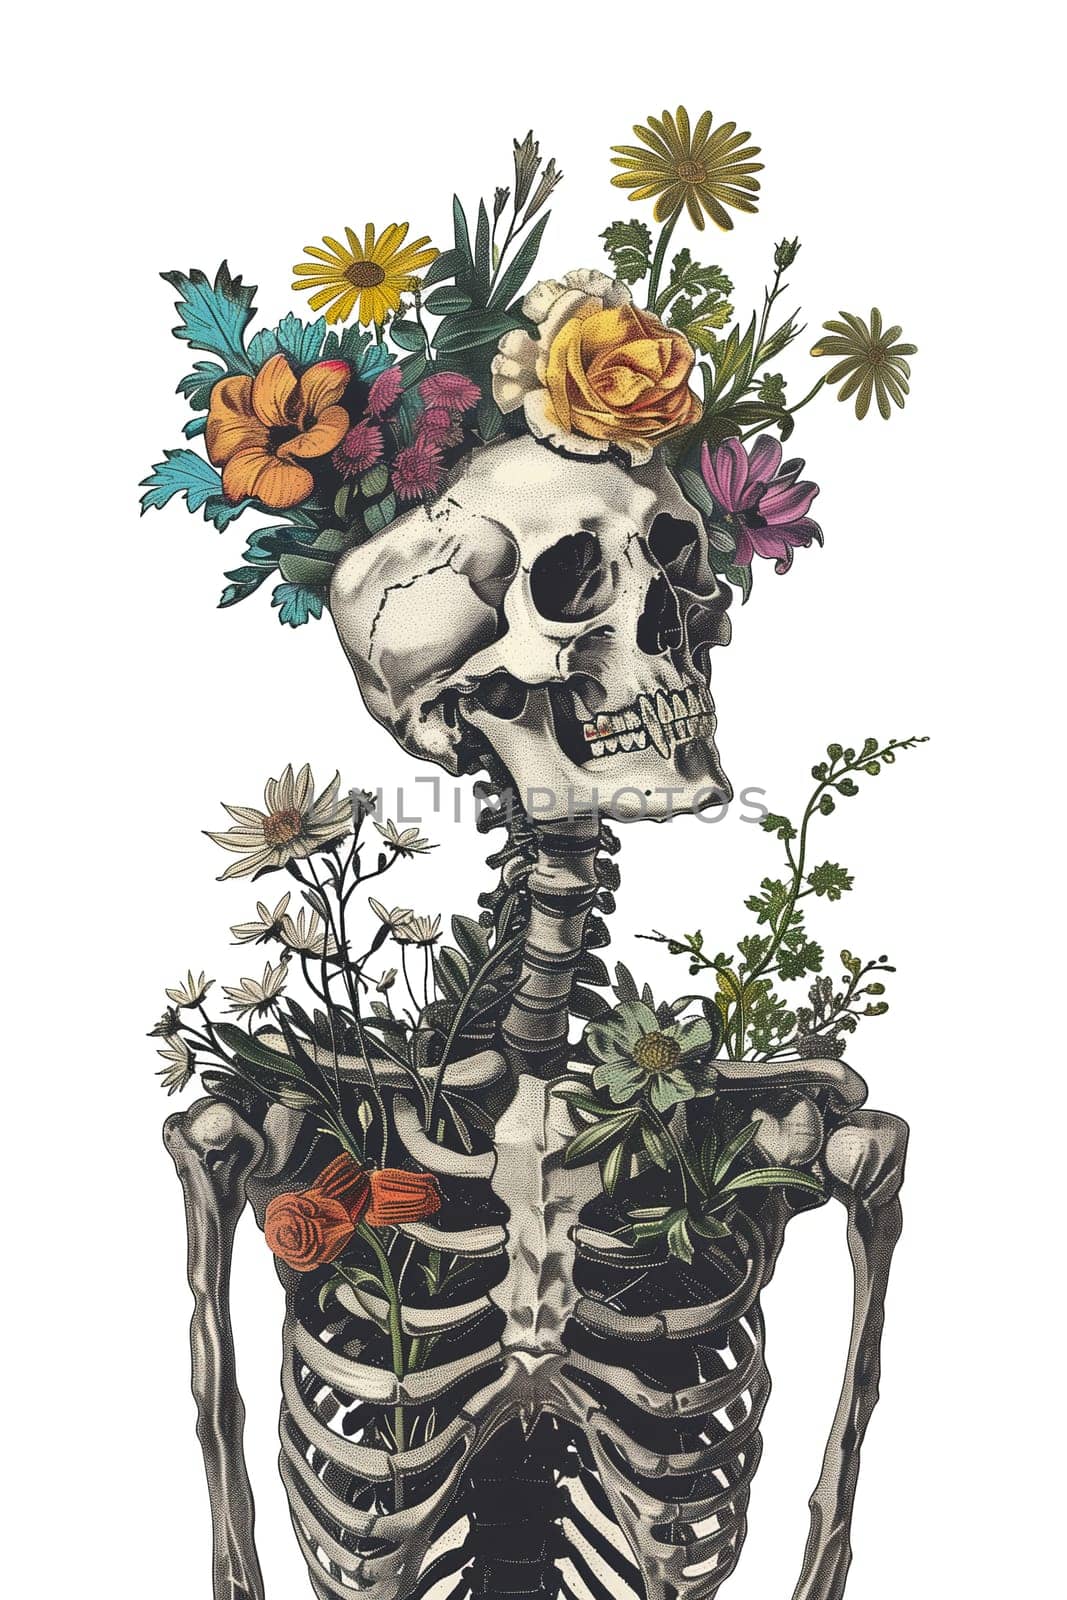 Vintage Illustration of skeleton with flowers on head by Dustick